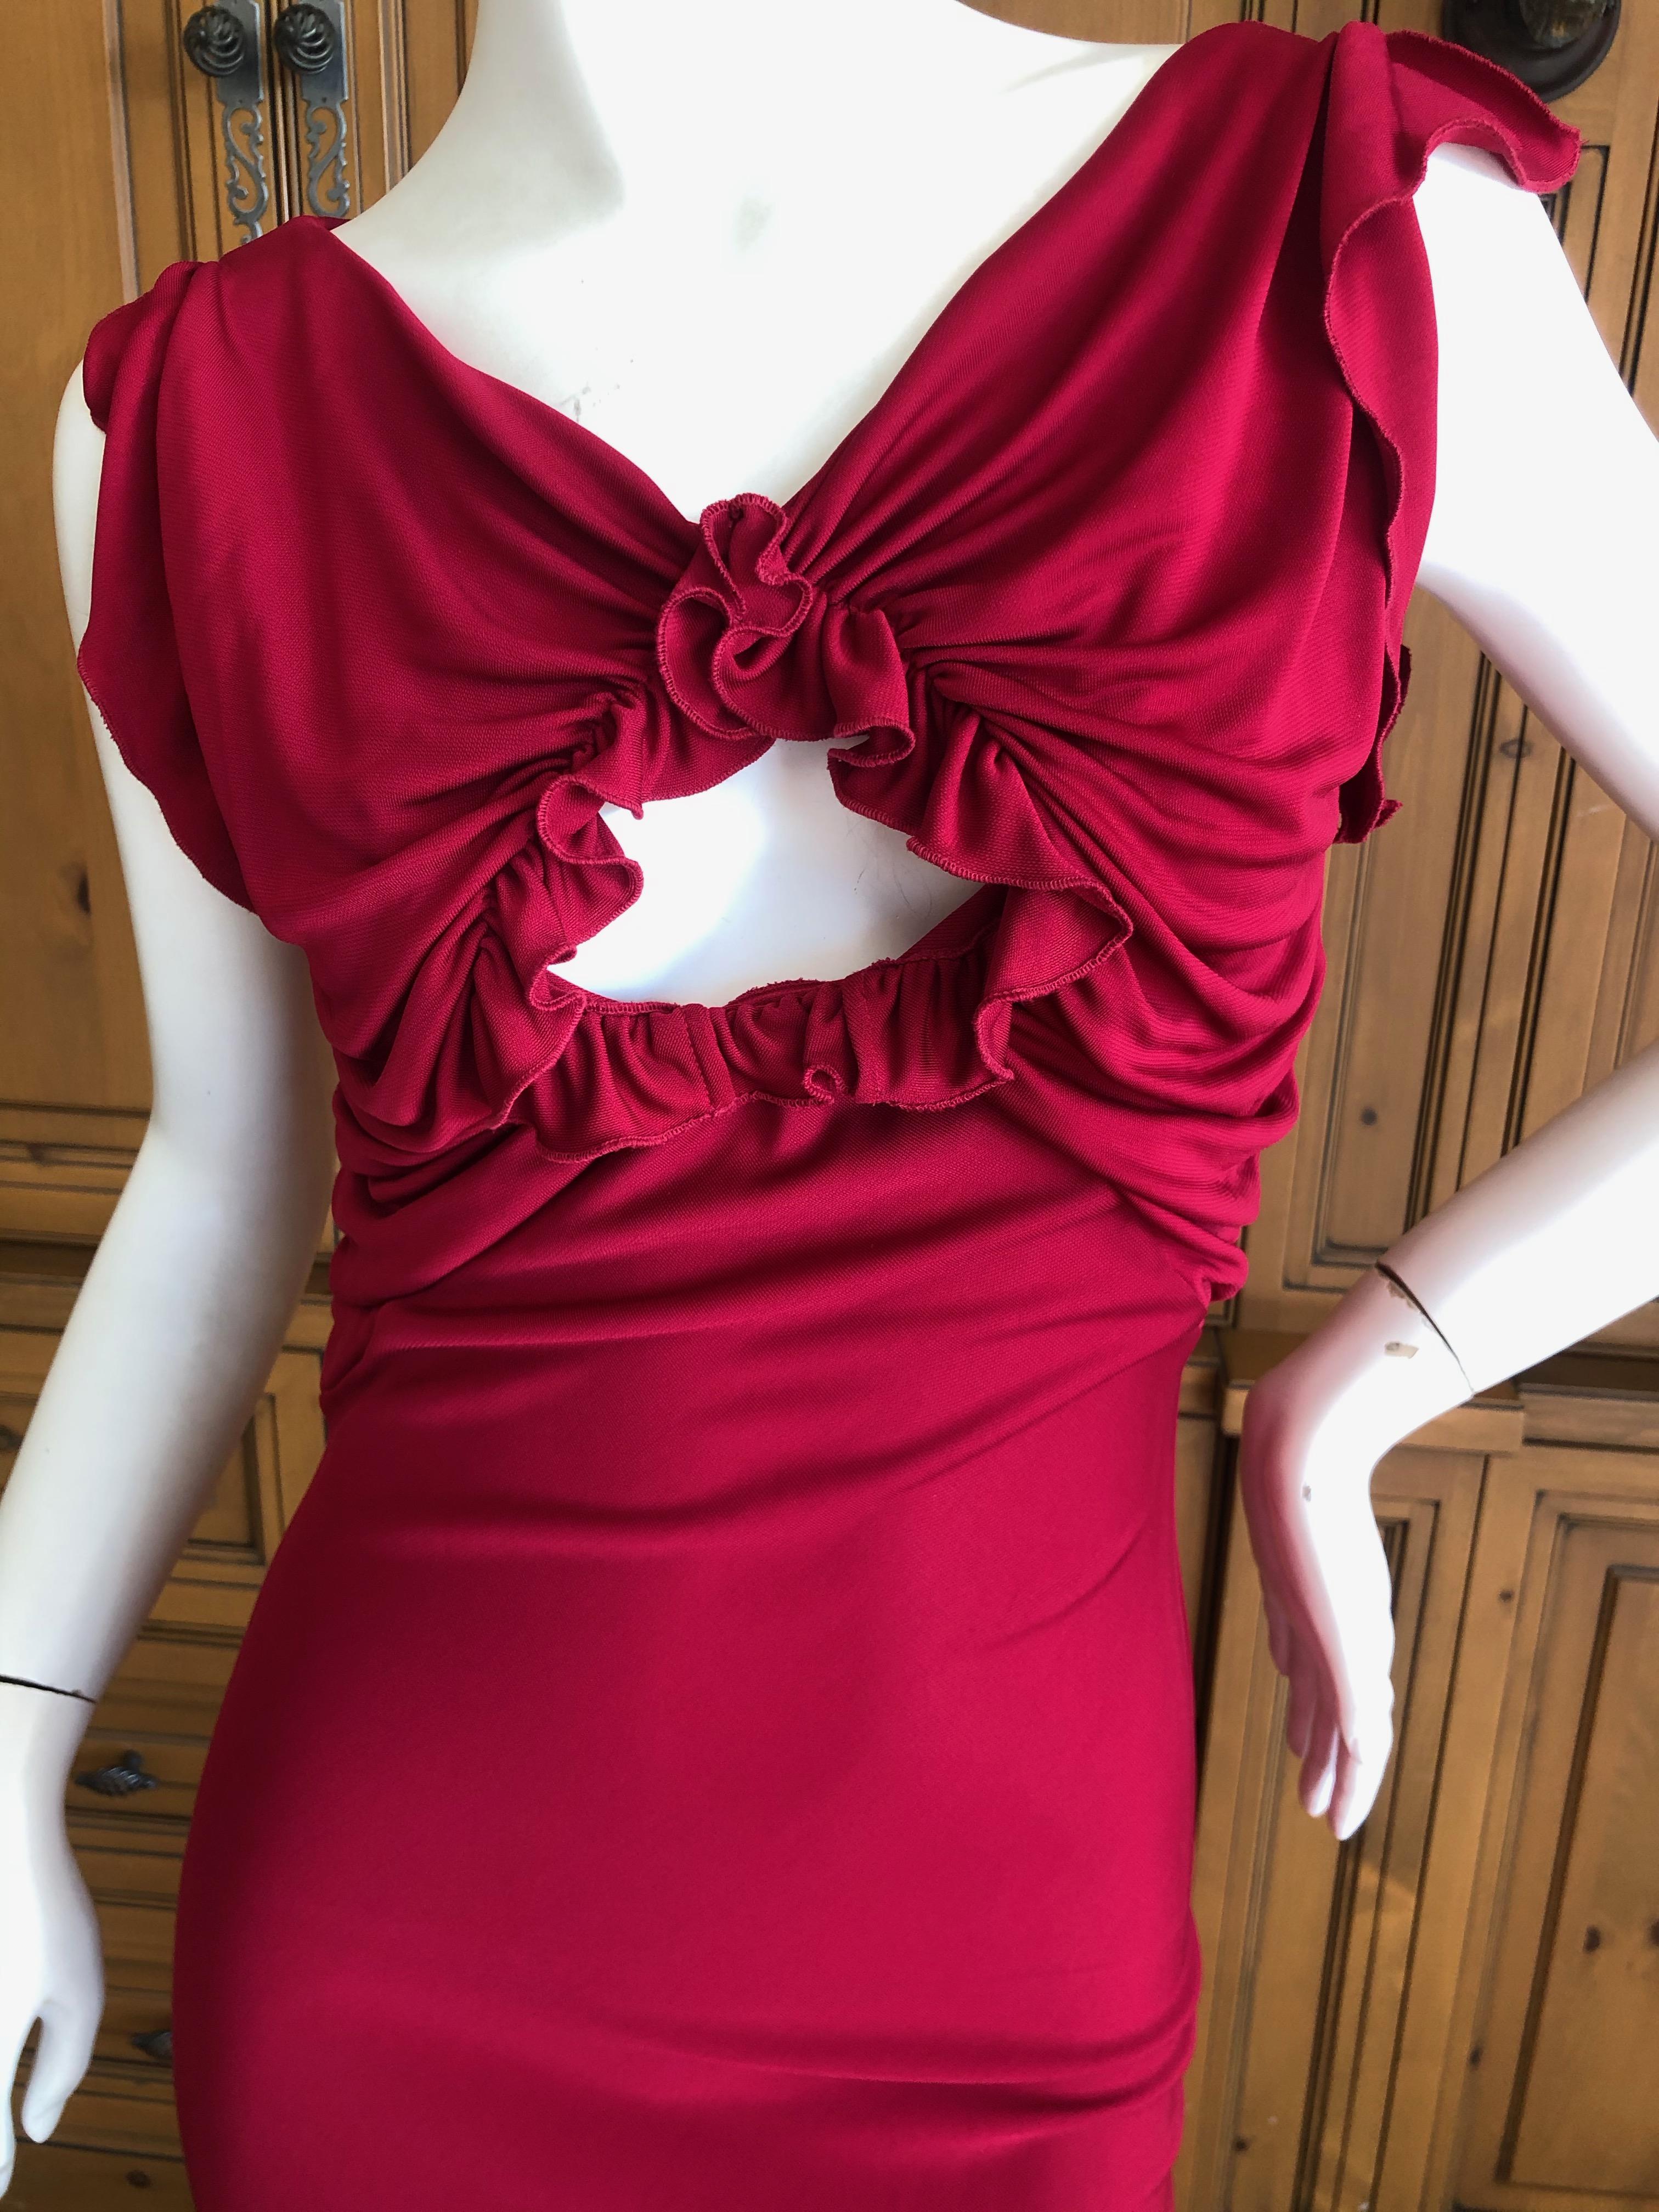 Women's   John Galliano Vintage Bias Cut Red Evening Dress with Keyhole Details For Sale